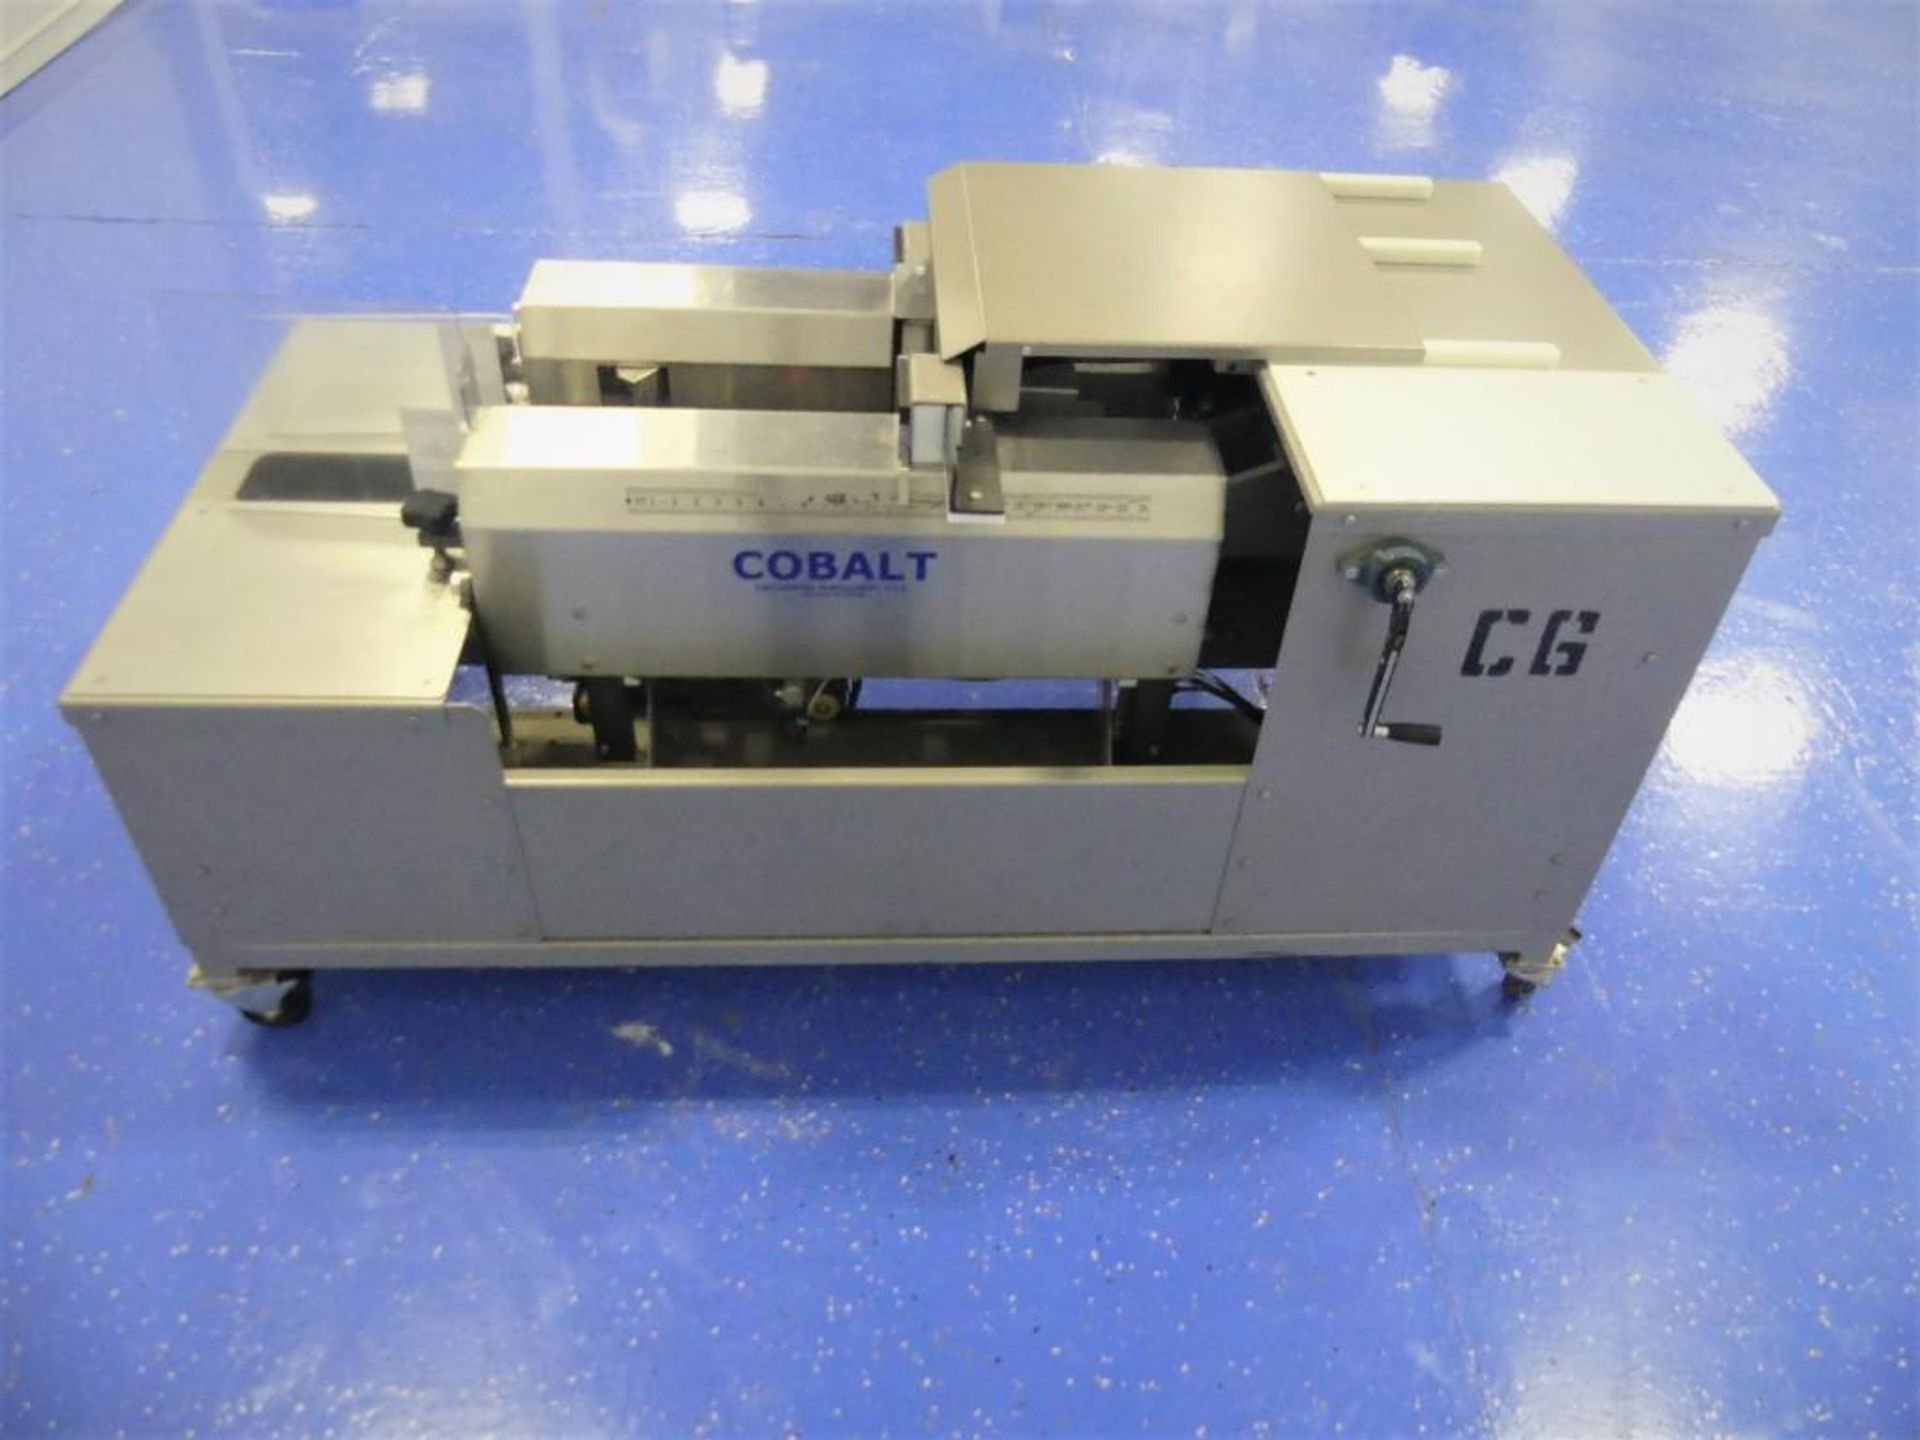 Cobalt 100 Series Semi-Automatic Case Former - Image 2 of 10